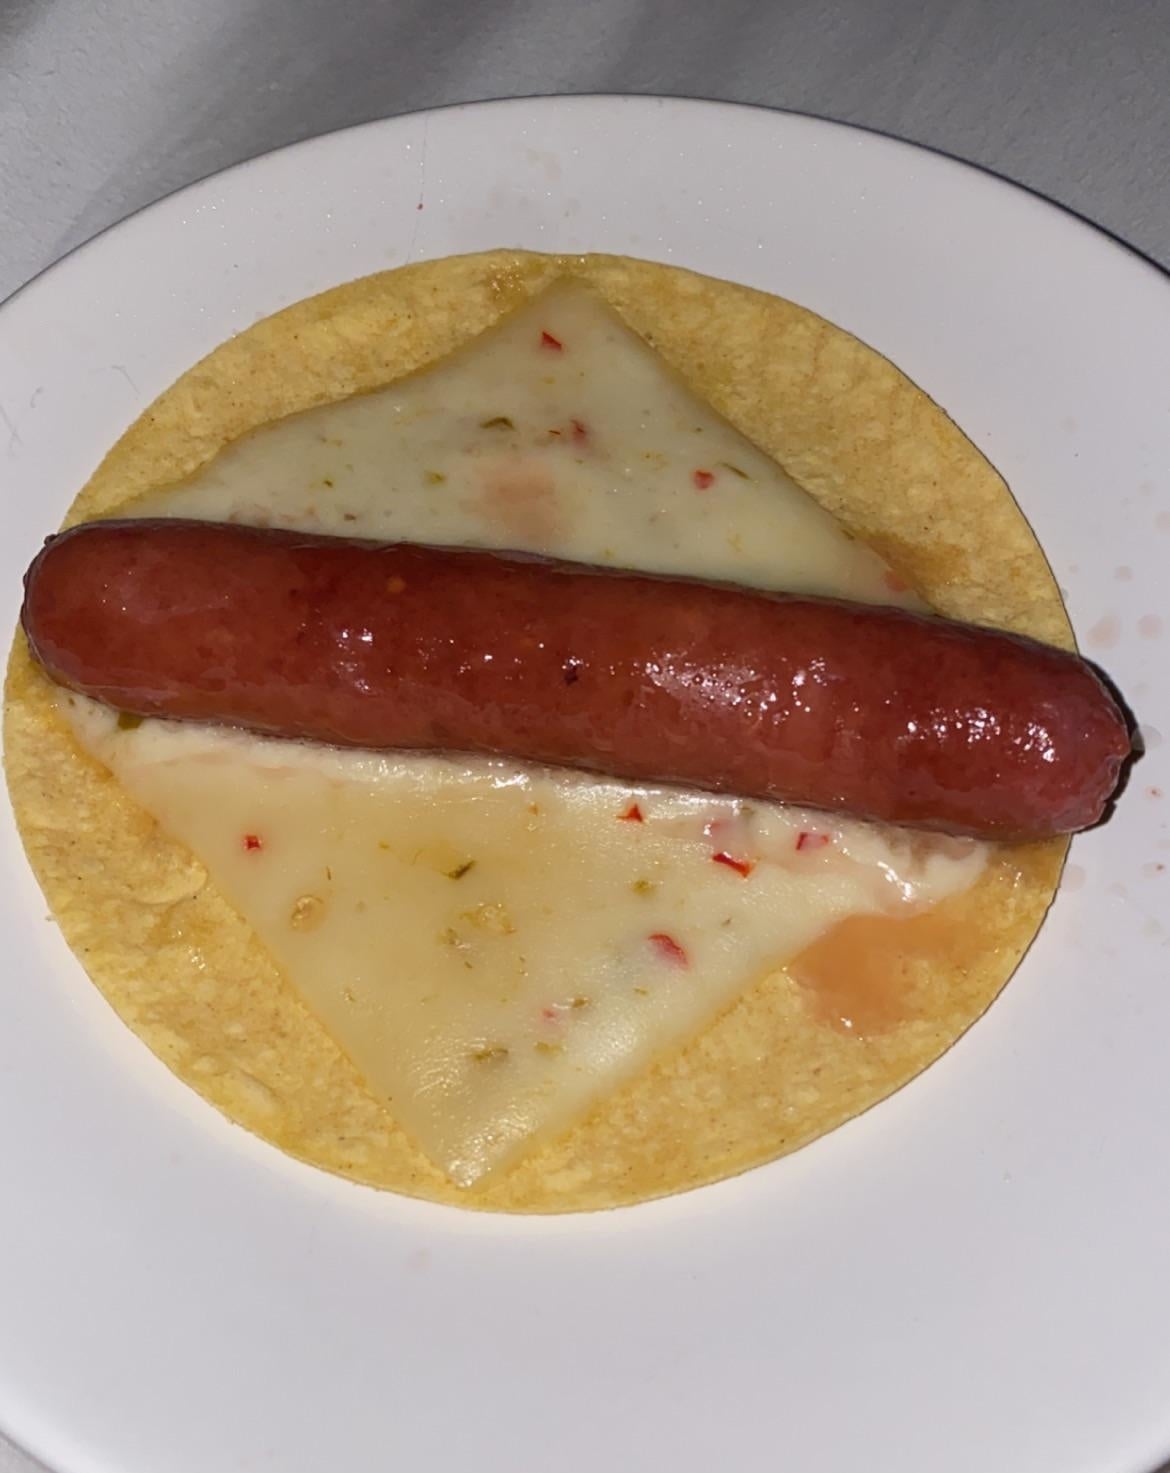 a corn tortilla with a slice of pepper jack and a hot dog on top